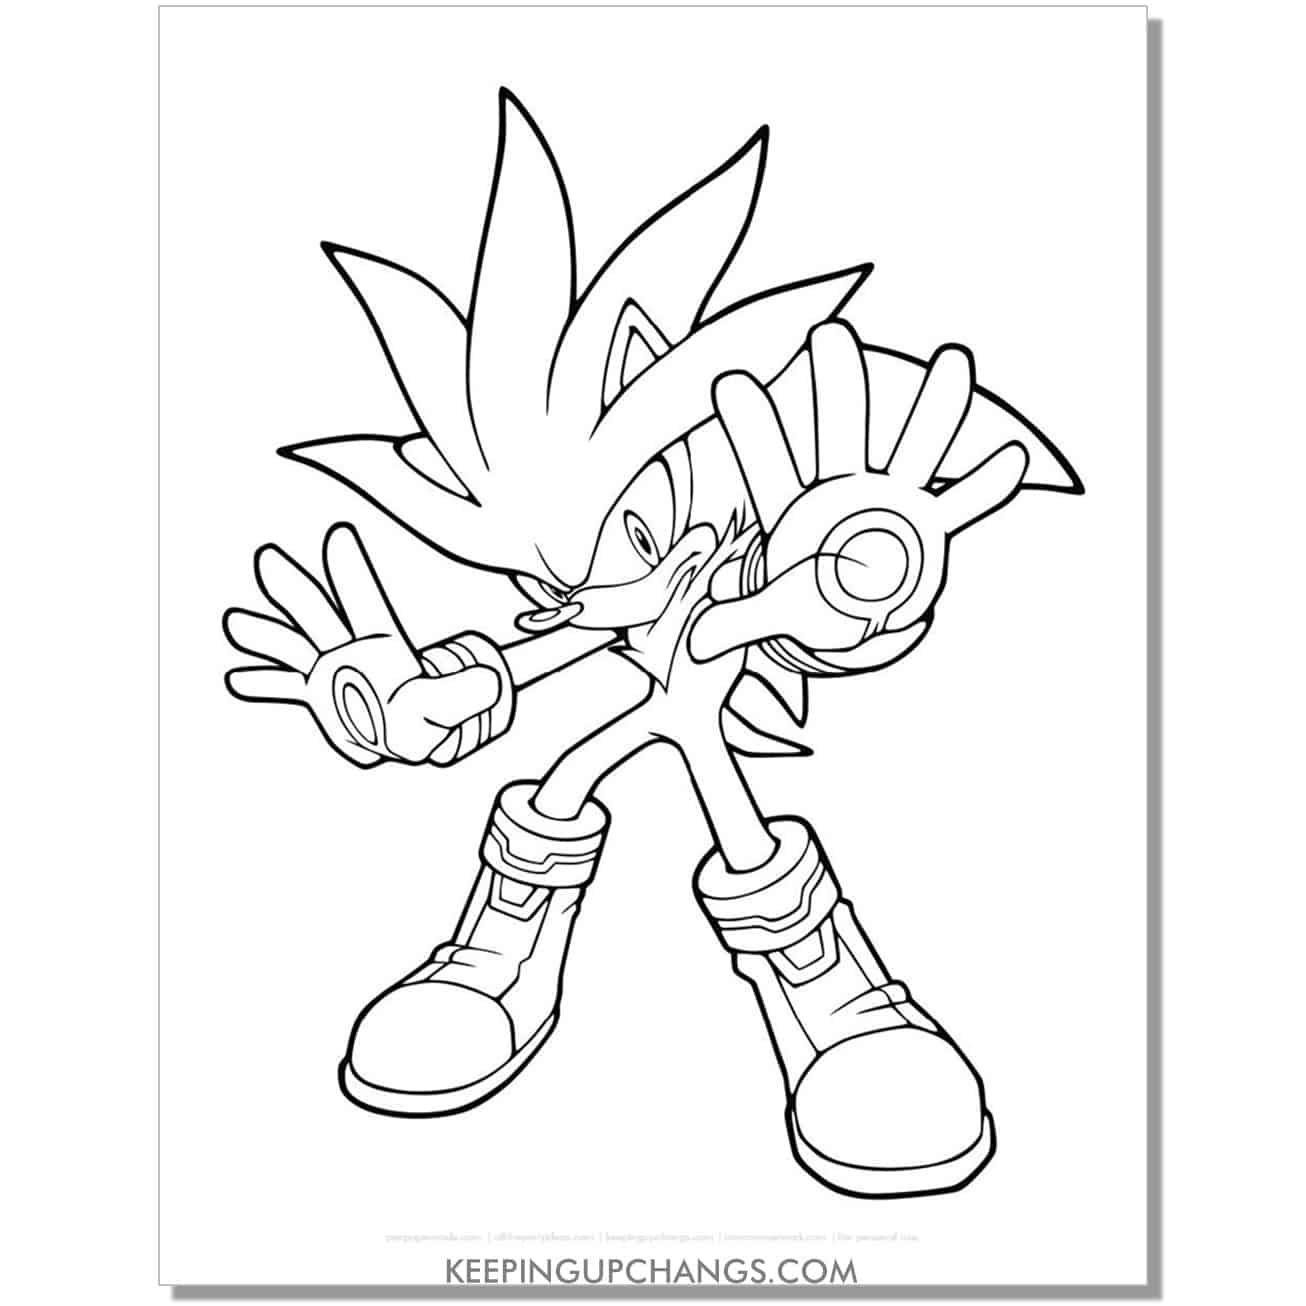 silver sonic coloring page.